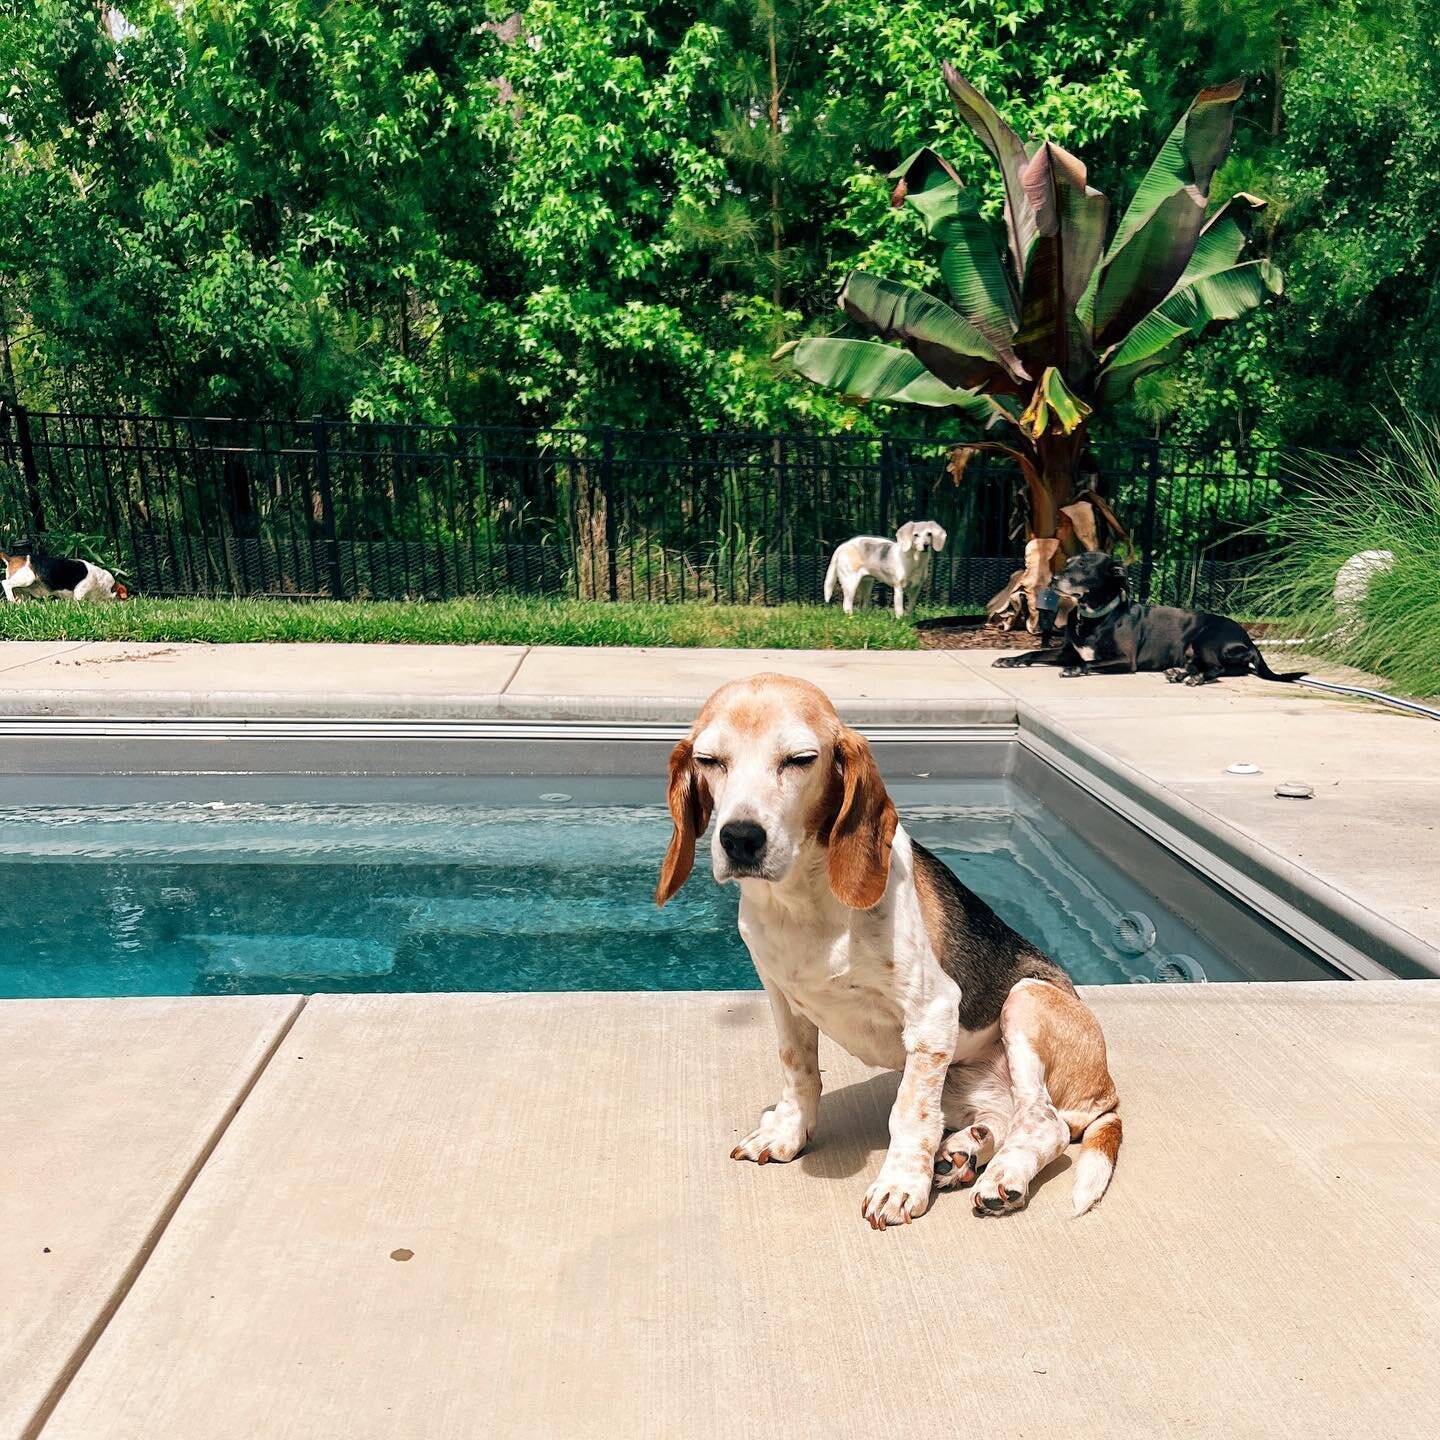 Sweet Dolly Dog is having a rough time right now with some health stuff, but she loves sunning herself by the pool. ❤️
#beaglegram #instabeagle #beaglelife #beaglesofinstagram #beaglelove #dogoftheday #dogsofinstagram